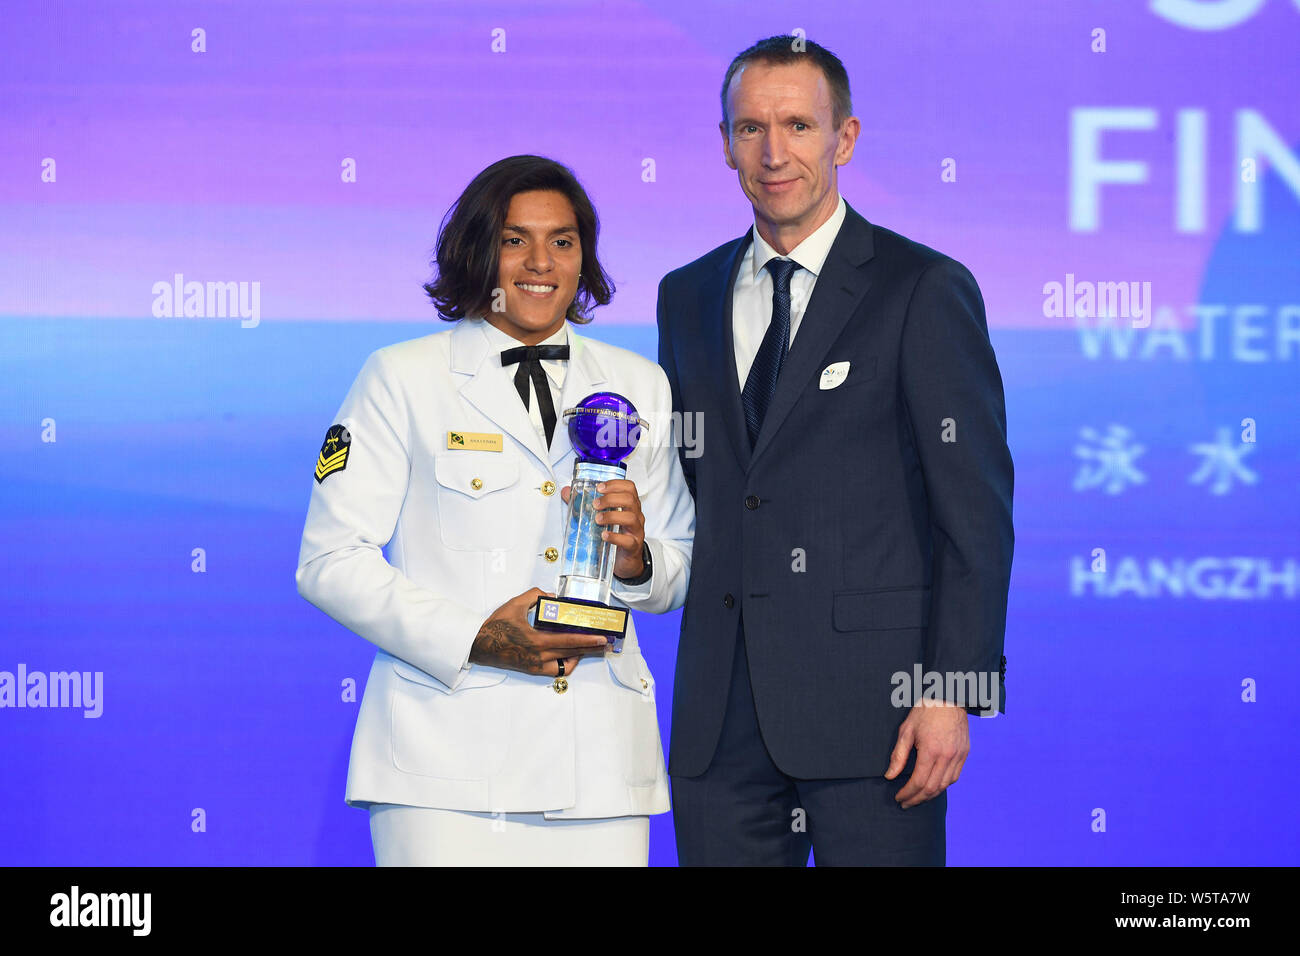 Brazilian athlete Ana Marcela Cunha receives her trophy of the 'FINA Best Female Open Water Athlete of the Year 2018' at the fifth edition of the FINA Stock Photo